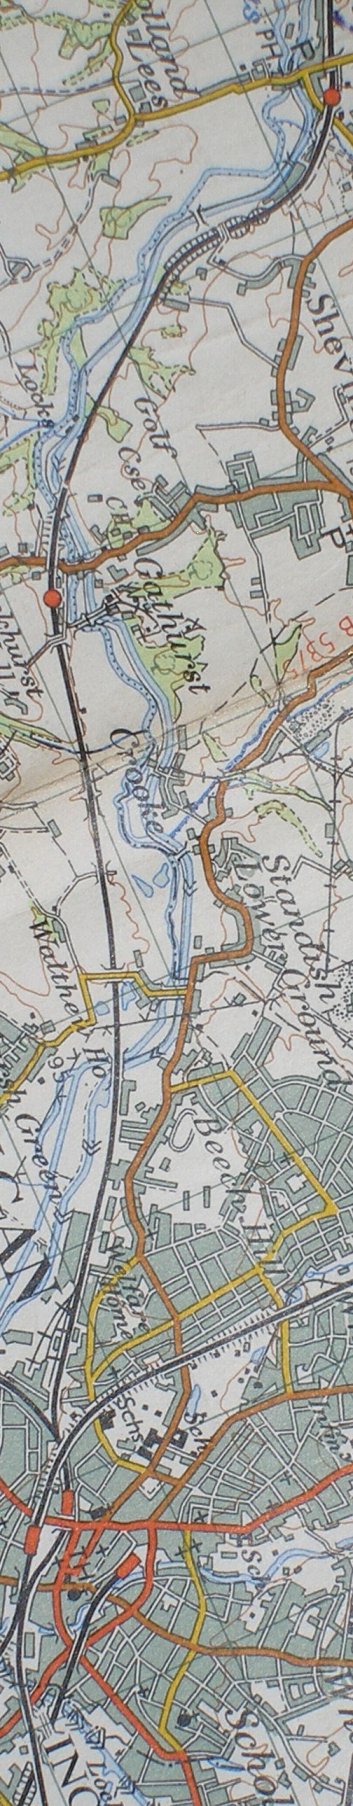 Section from the Ordnance Survey map 1961 showing L&YR railway line from Gathurst to Wigan Wallgate railway station